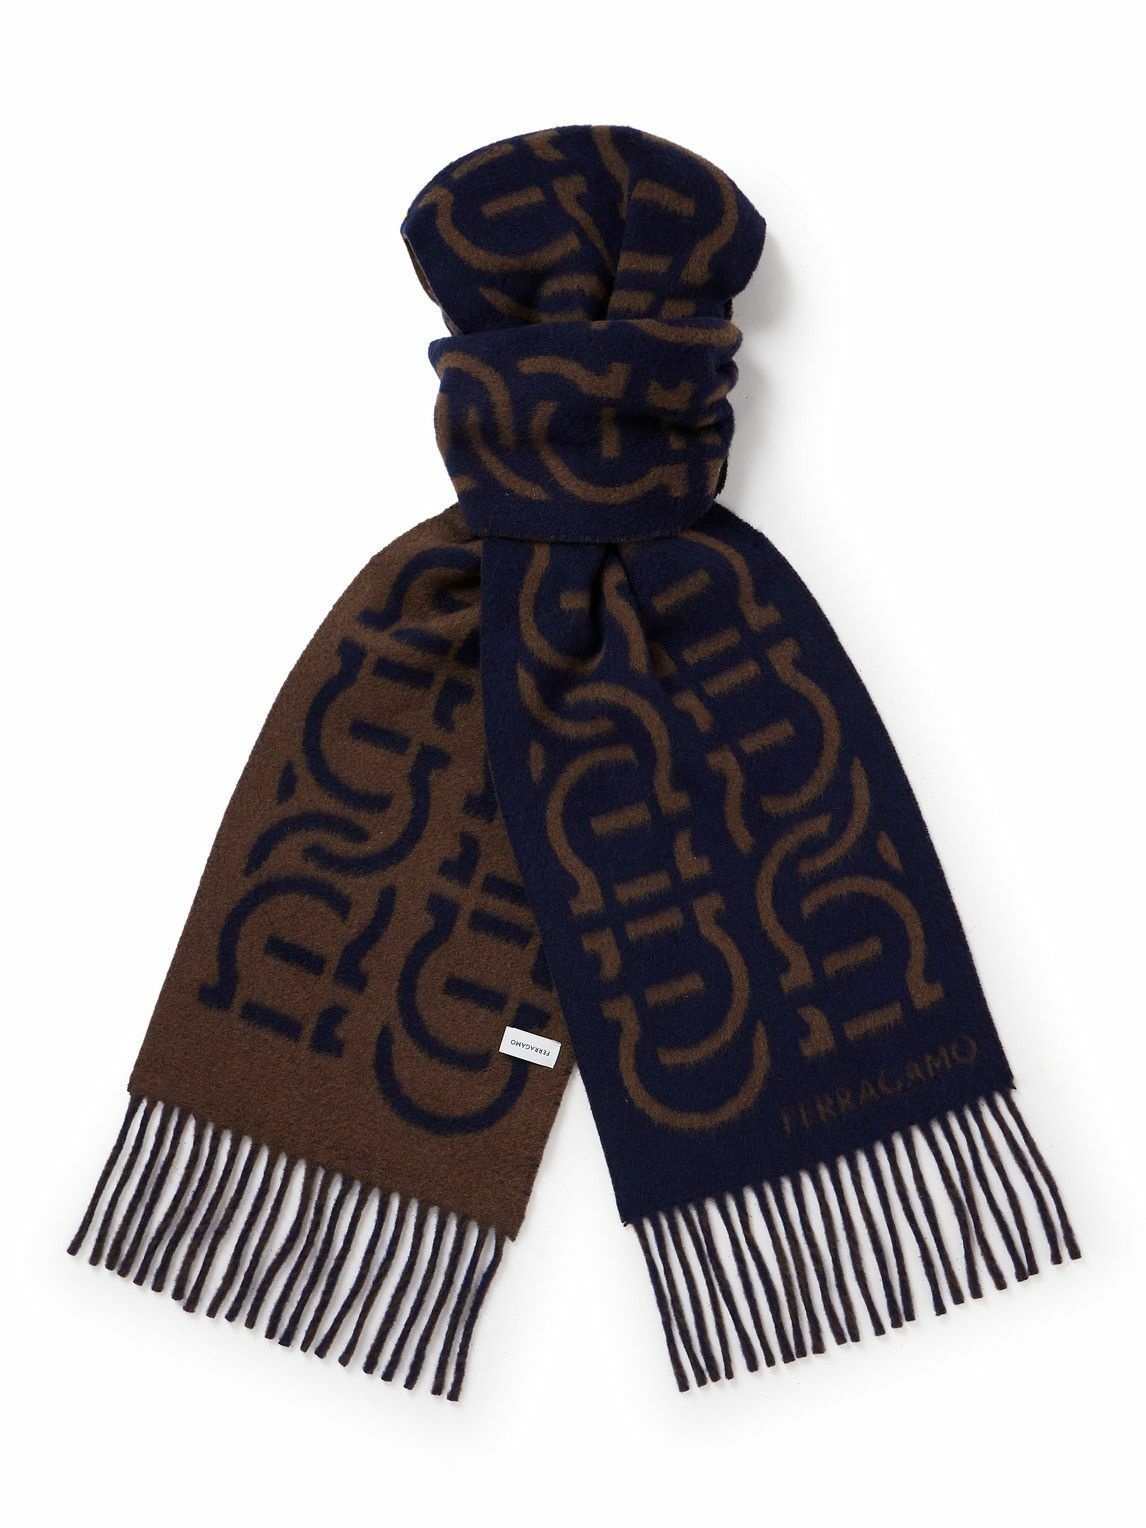 Photo: FERRAGAMO - Fringed Jacquard-Knit Wool and Cashmere-Blend Scarf